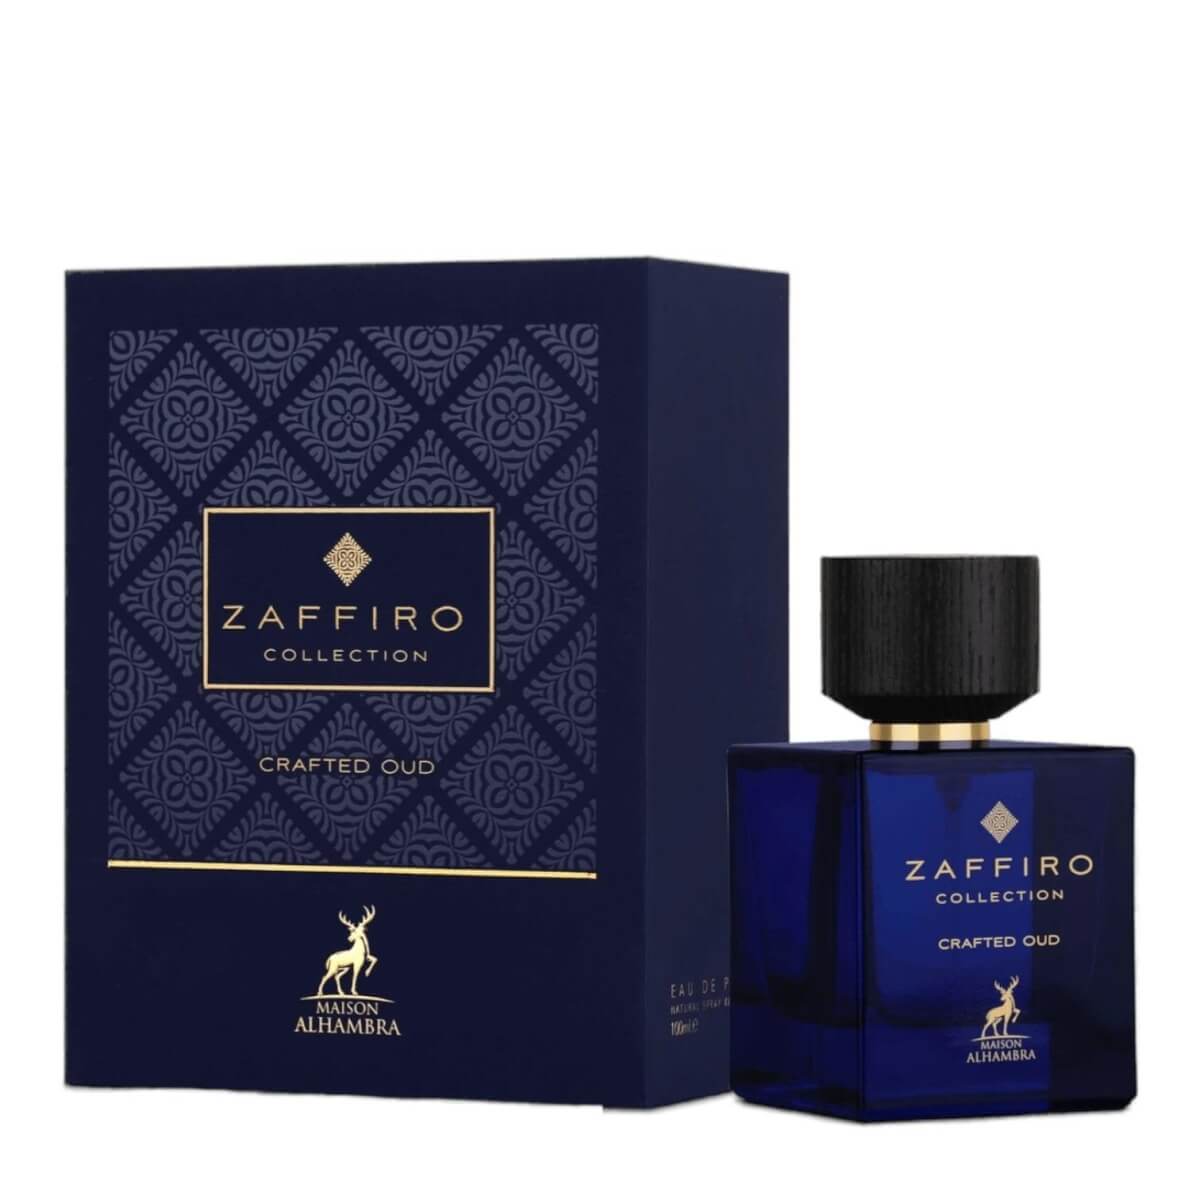 Zaffiro Collection Crafted Oud Perfume / Eau De Parfum 100Ml By Maison Alhambra / Lattafa (Inspired By Thameen Carved Oud)